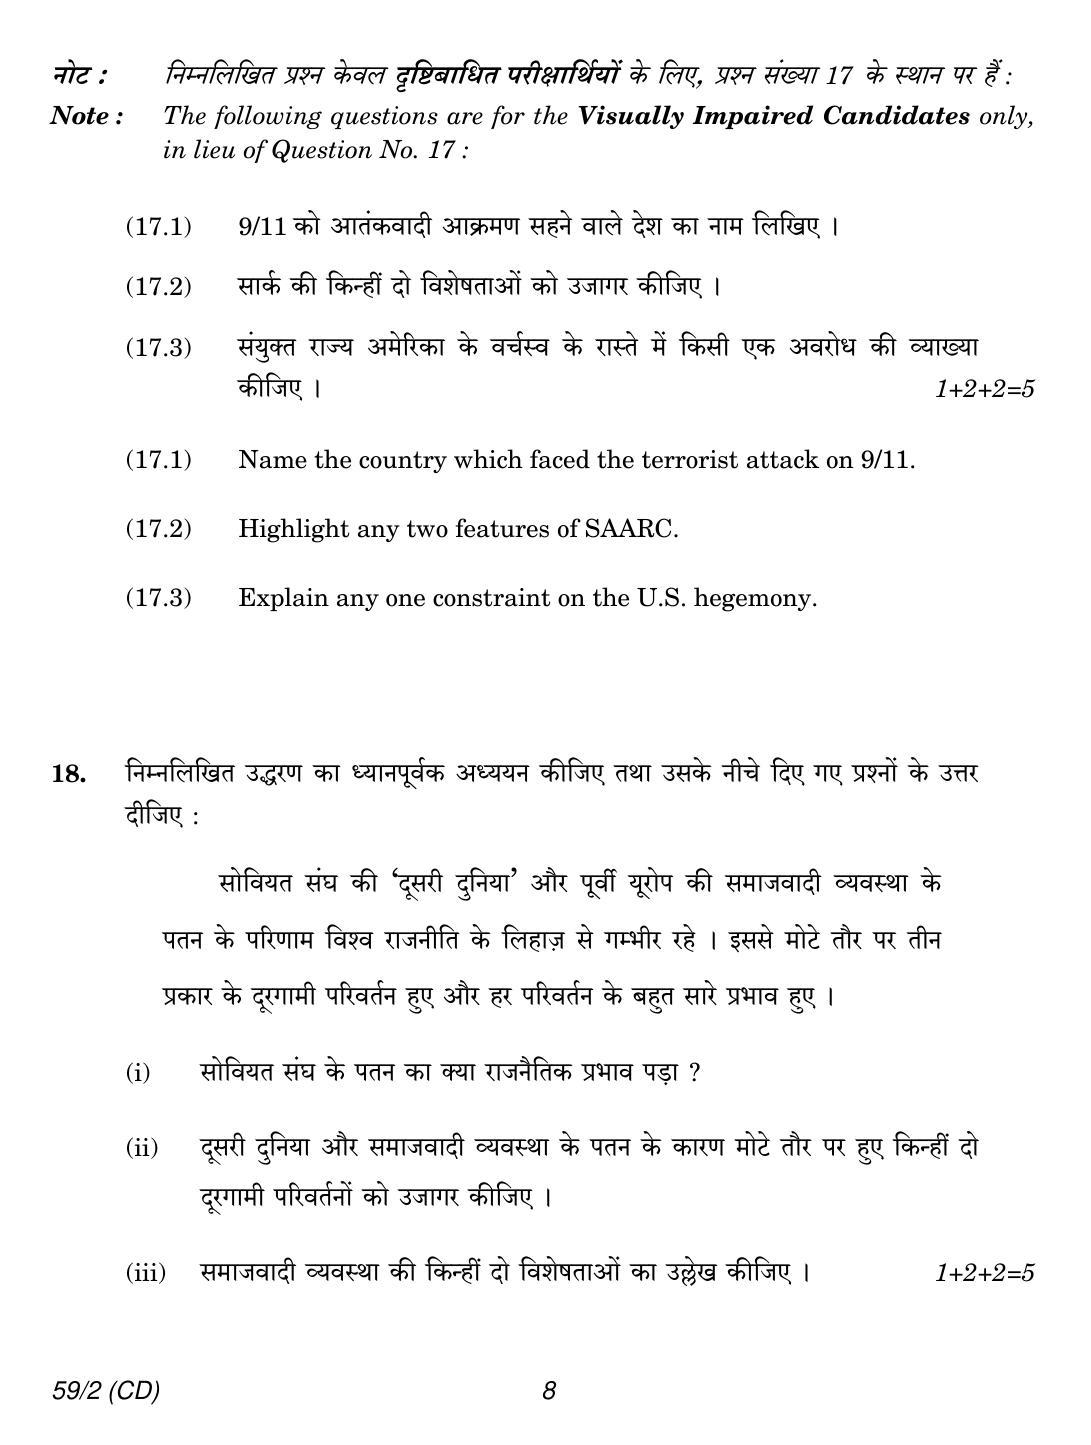 CBSE Class 12 59-2 POLITICAL SCIENCE CD 2018 Question Paper - Page 8